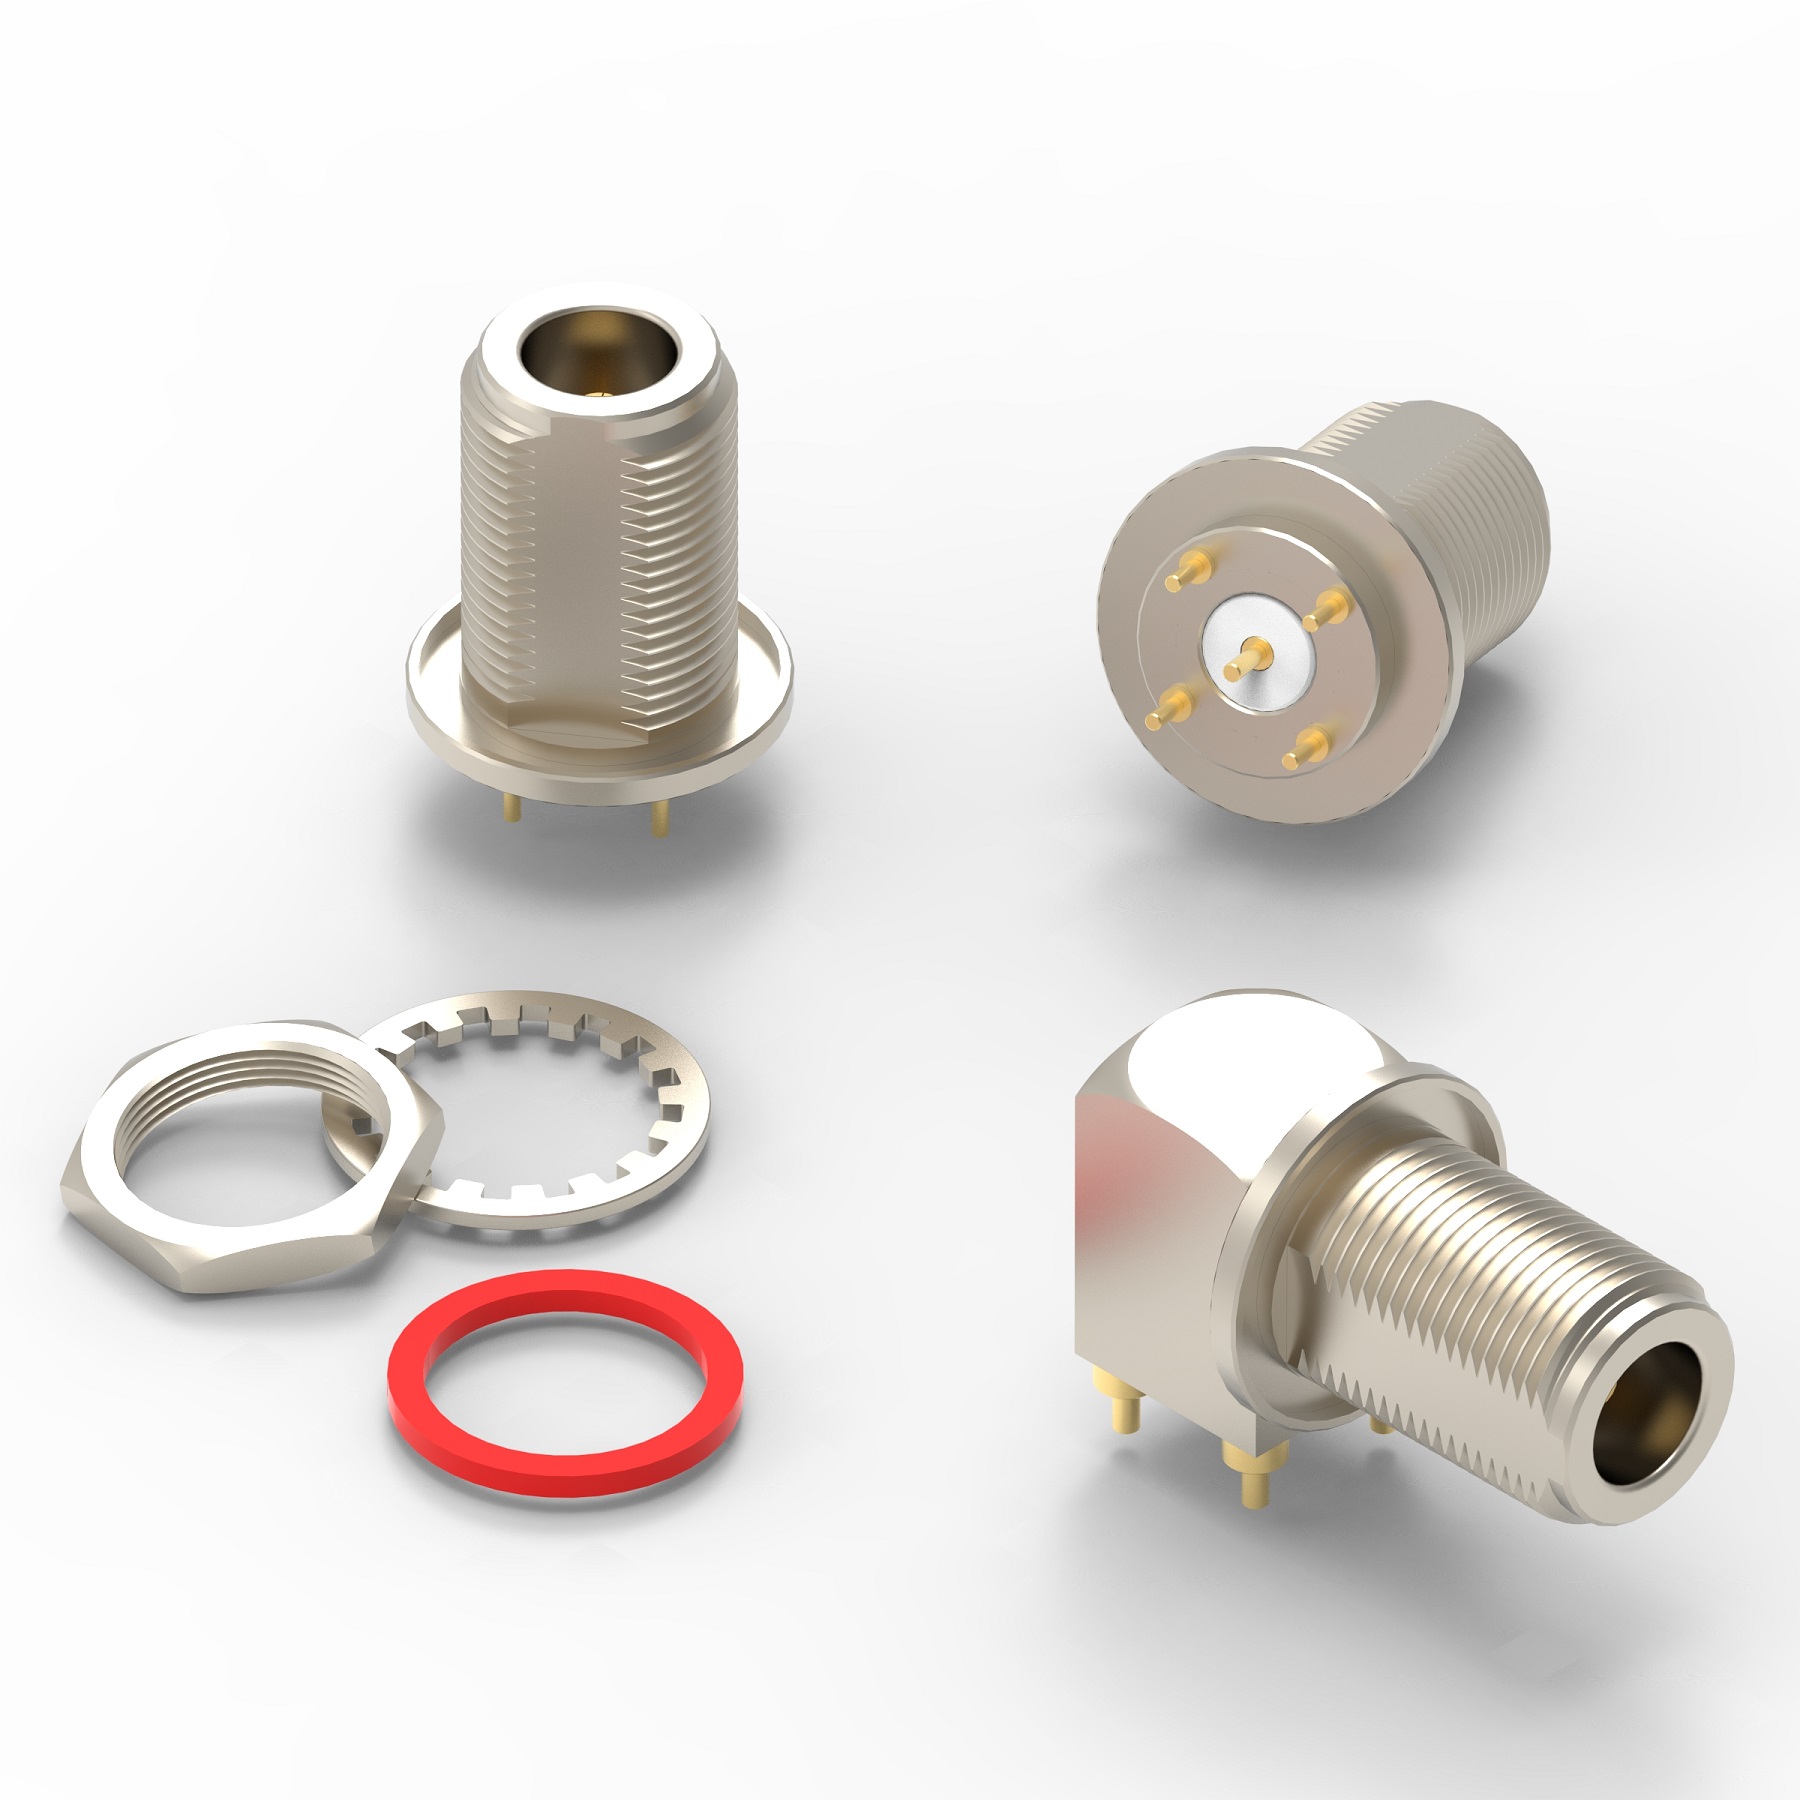 High-quality Antenna Connectors for Harsh Conditions